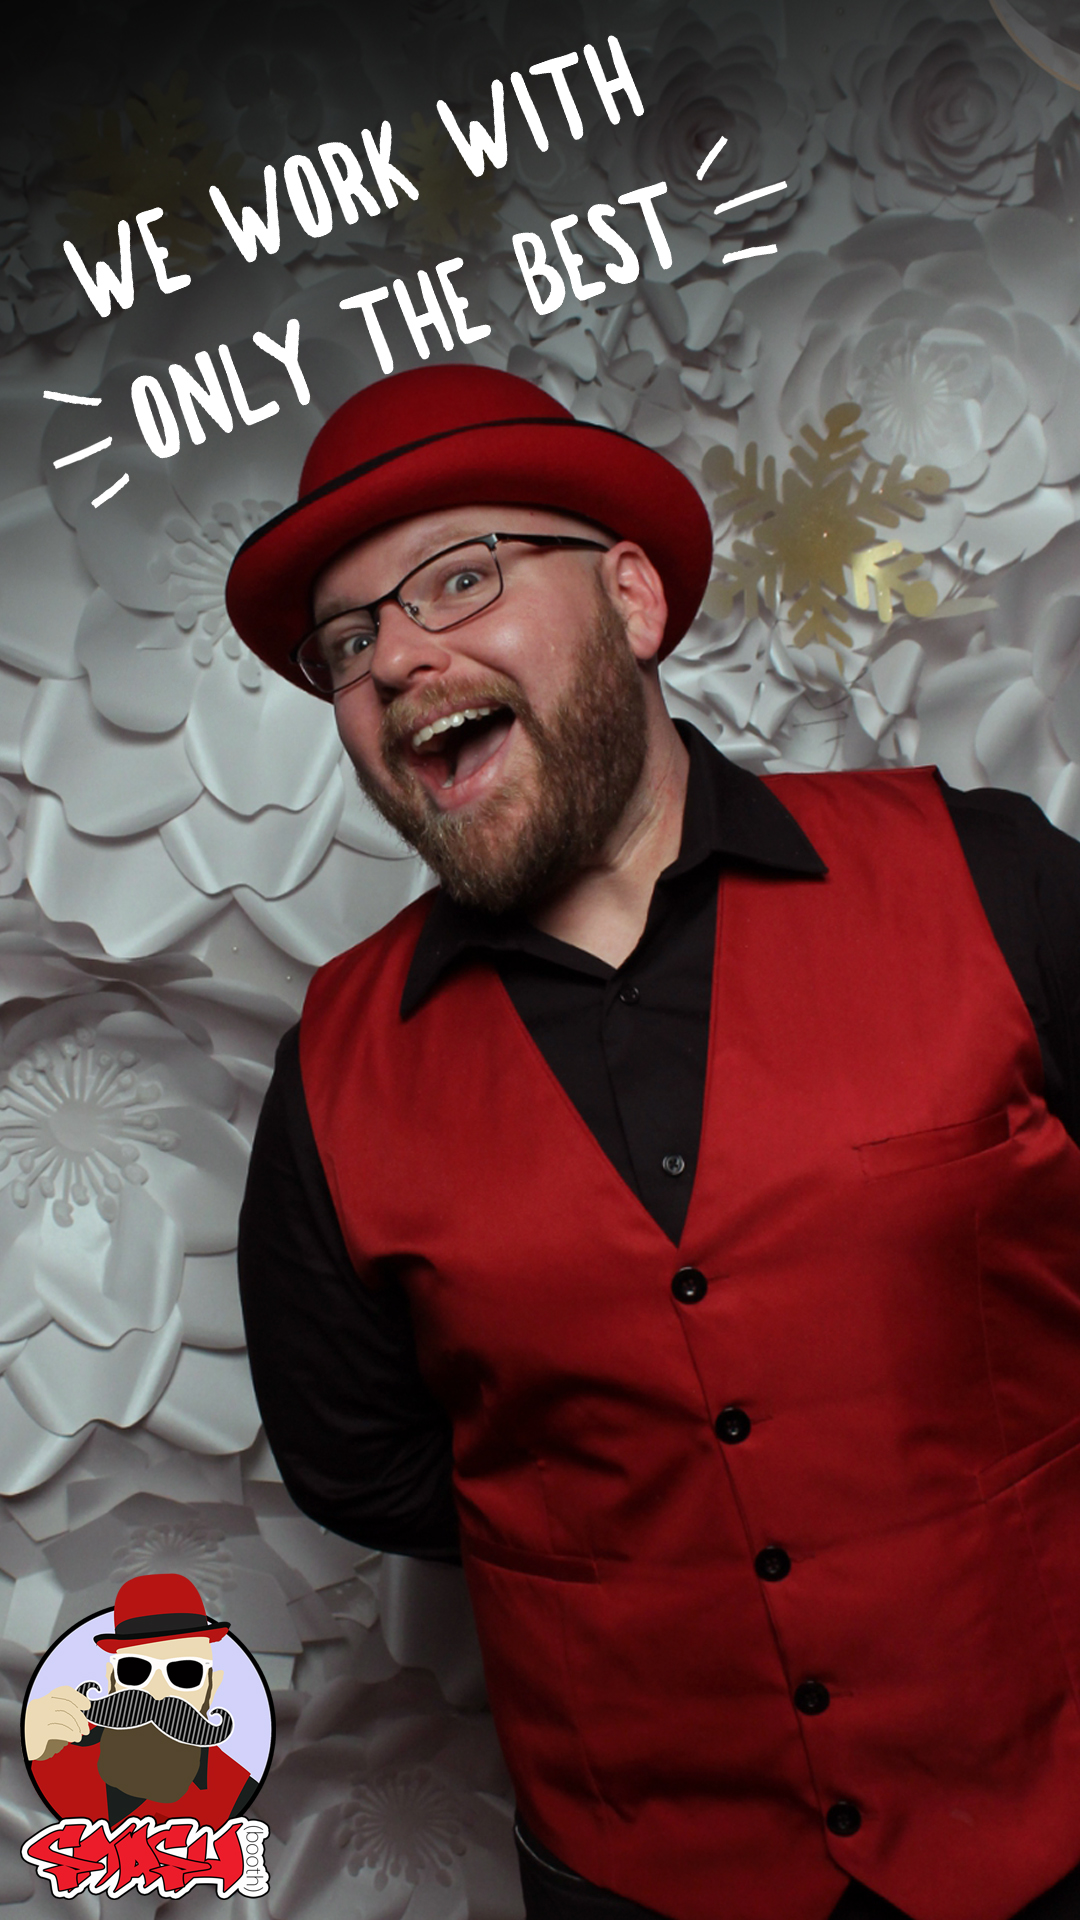 Smashbooth employee in red hat and vest